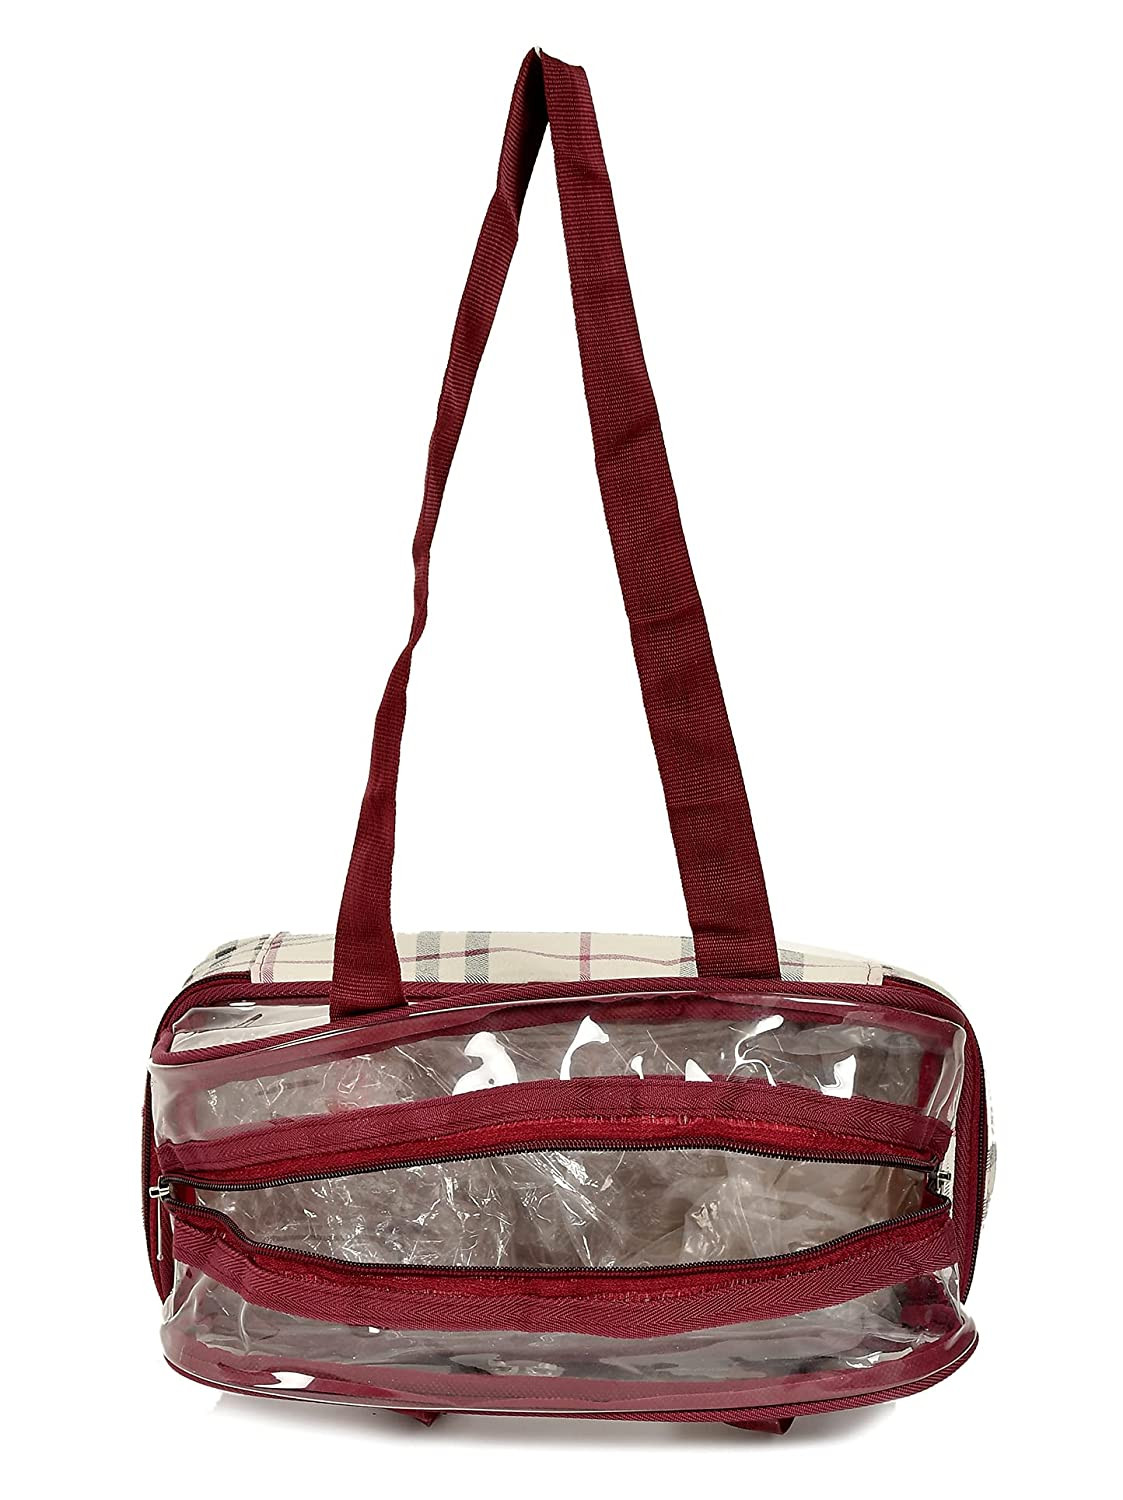 Kuber Industries Check Design Double Layer Travel Toiletry Bag/Organizer (Maroon)